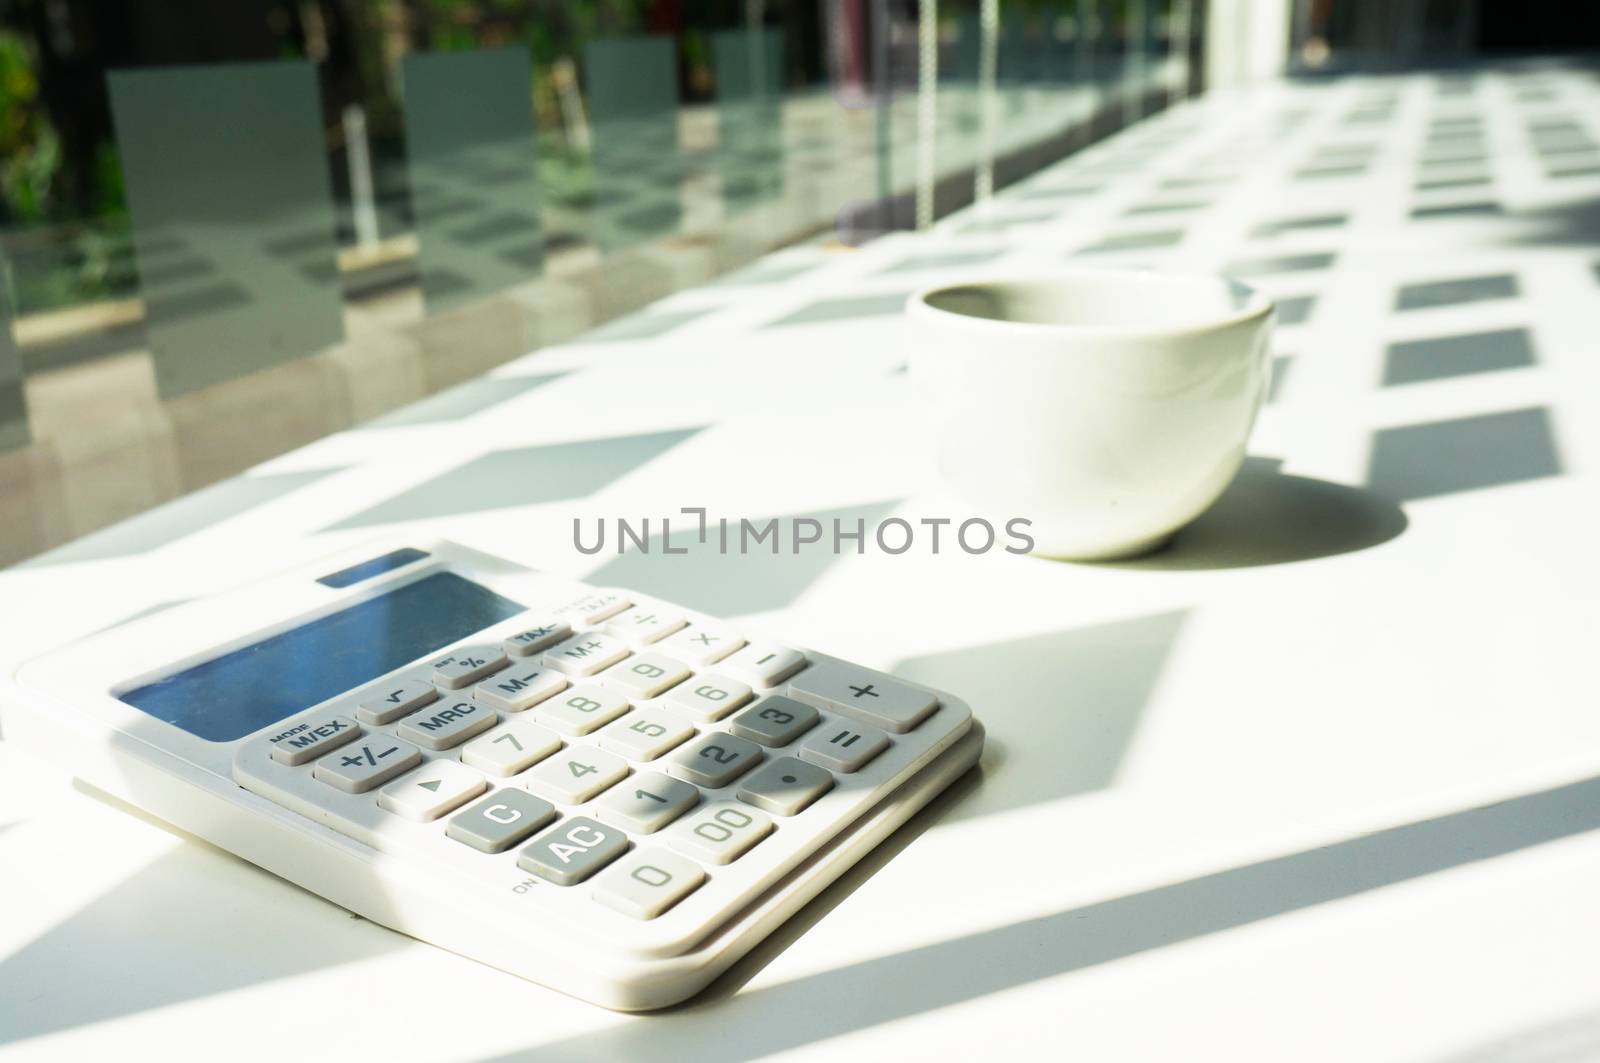 
Calculator with coffee in office. by peandben